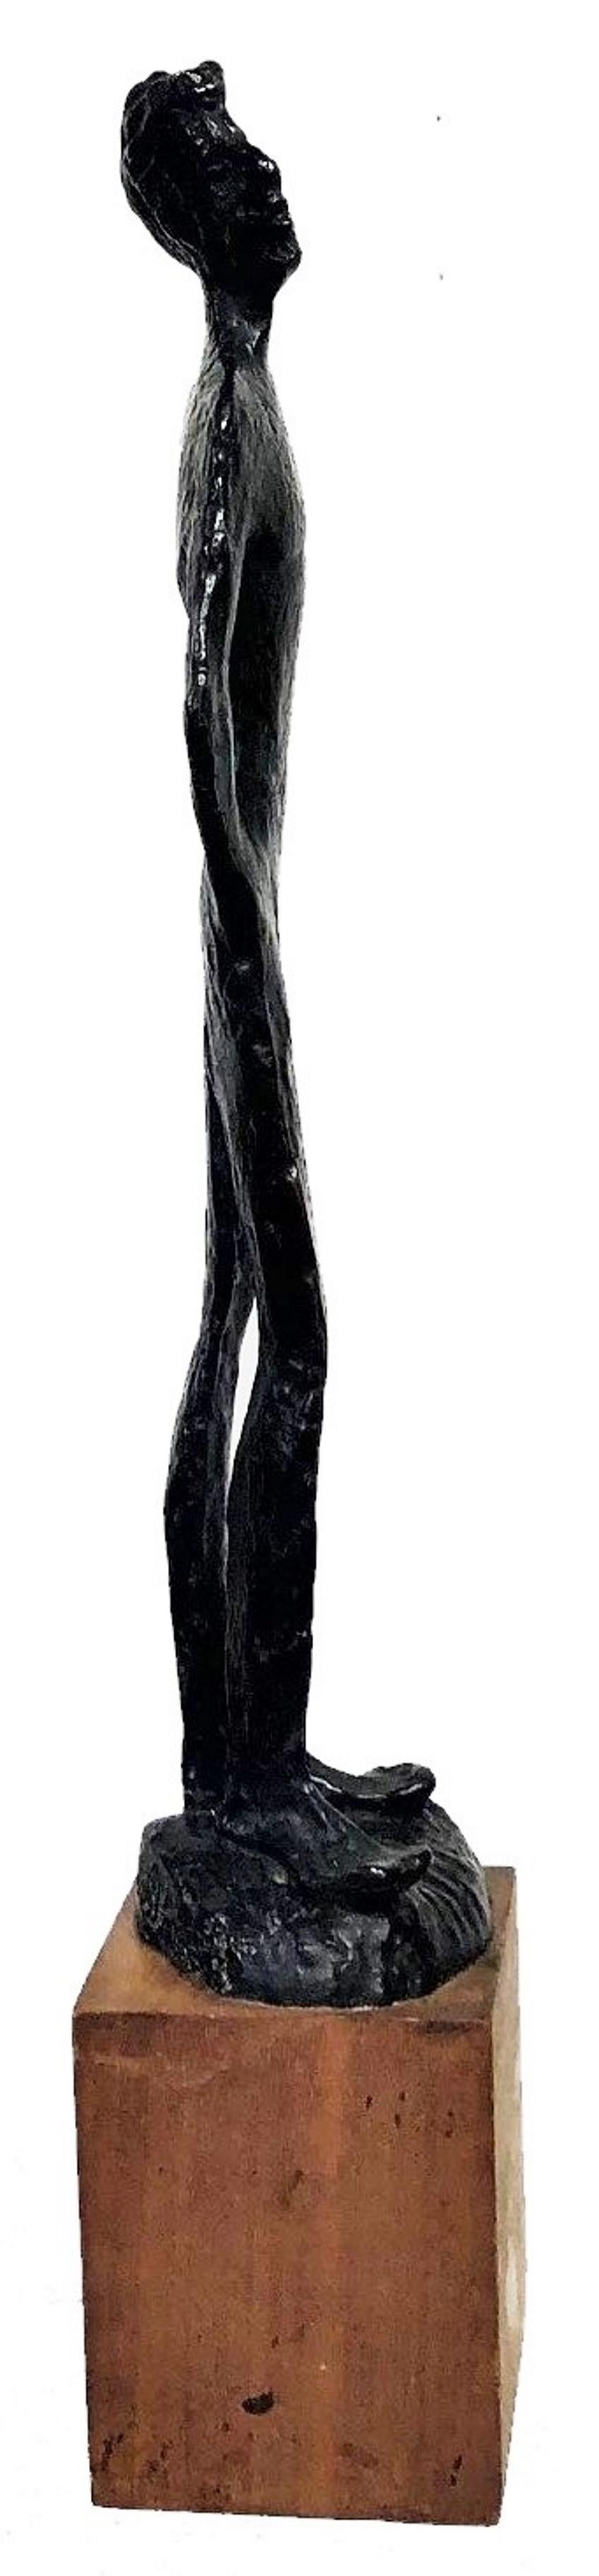 Modernist Bronze Sculpture of a Standing Man by L. Shore, 1953 For Sale 1